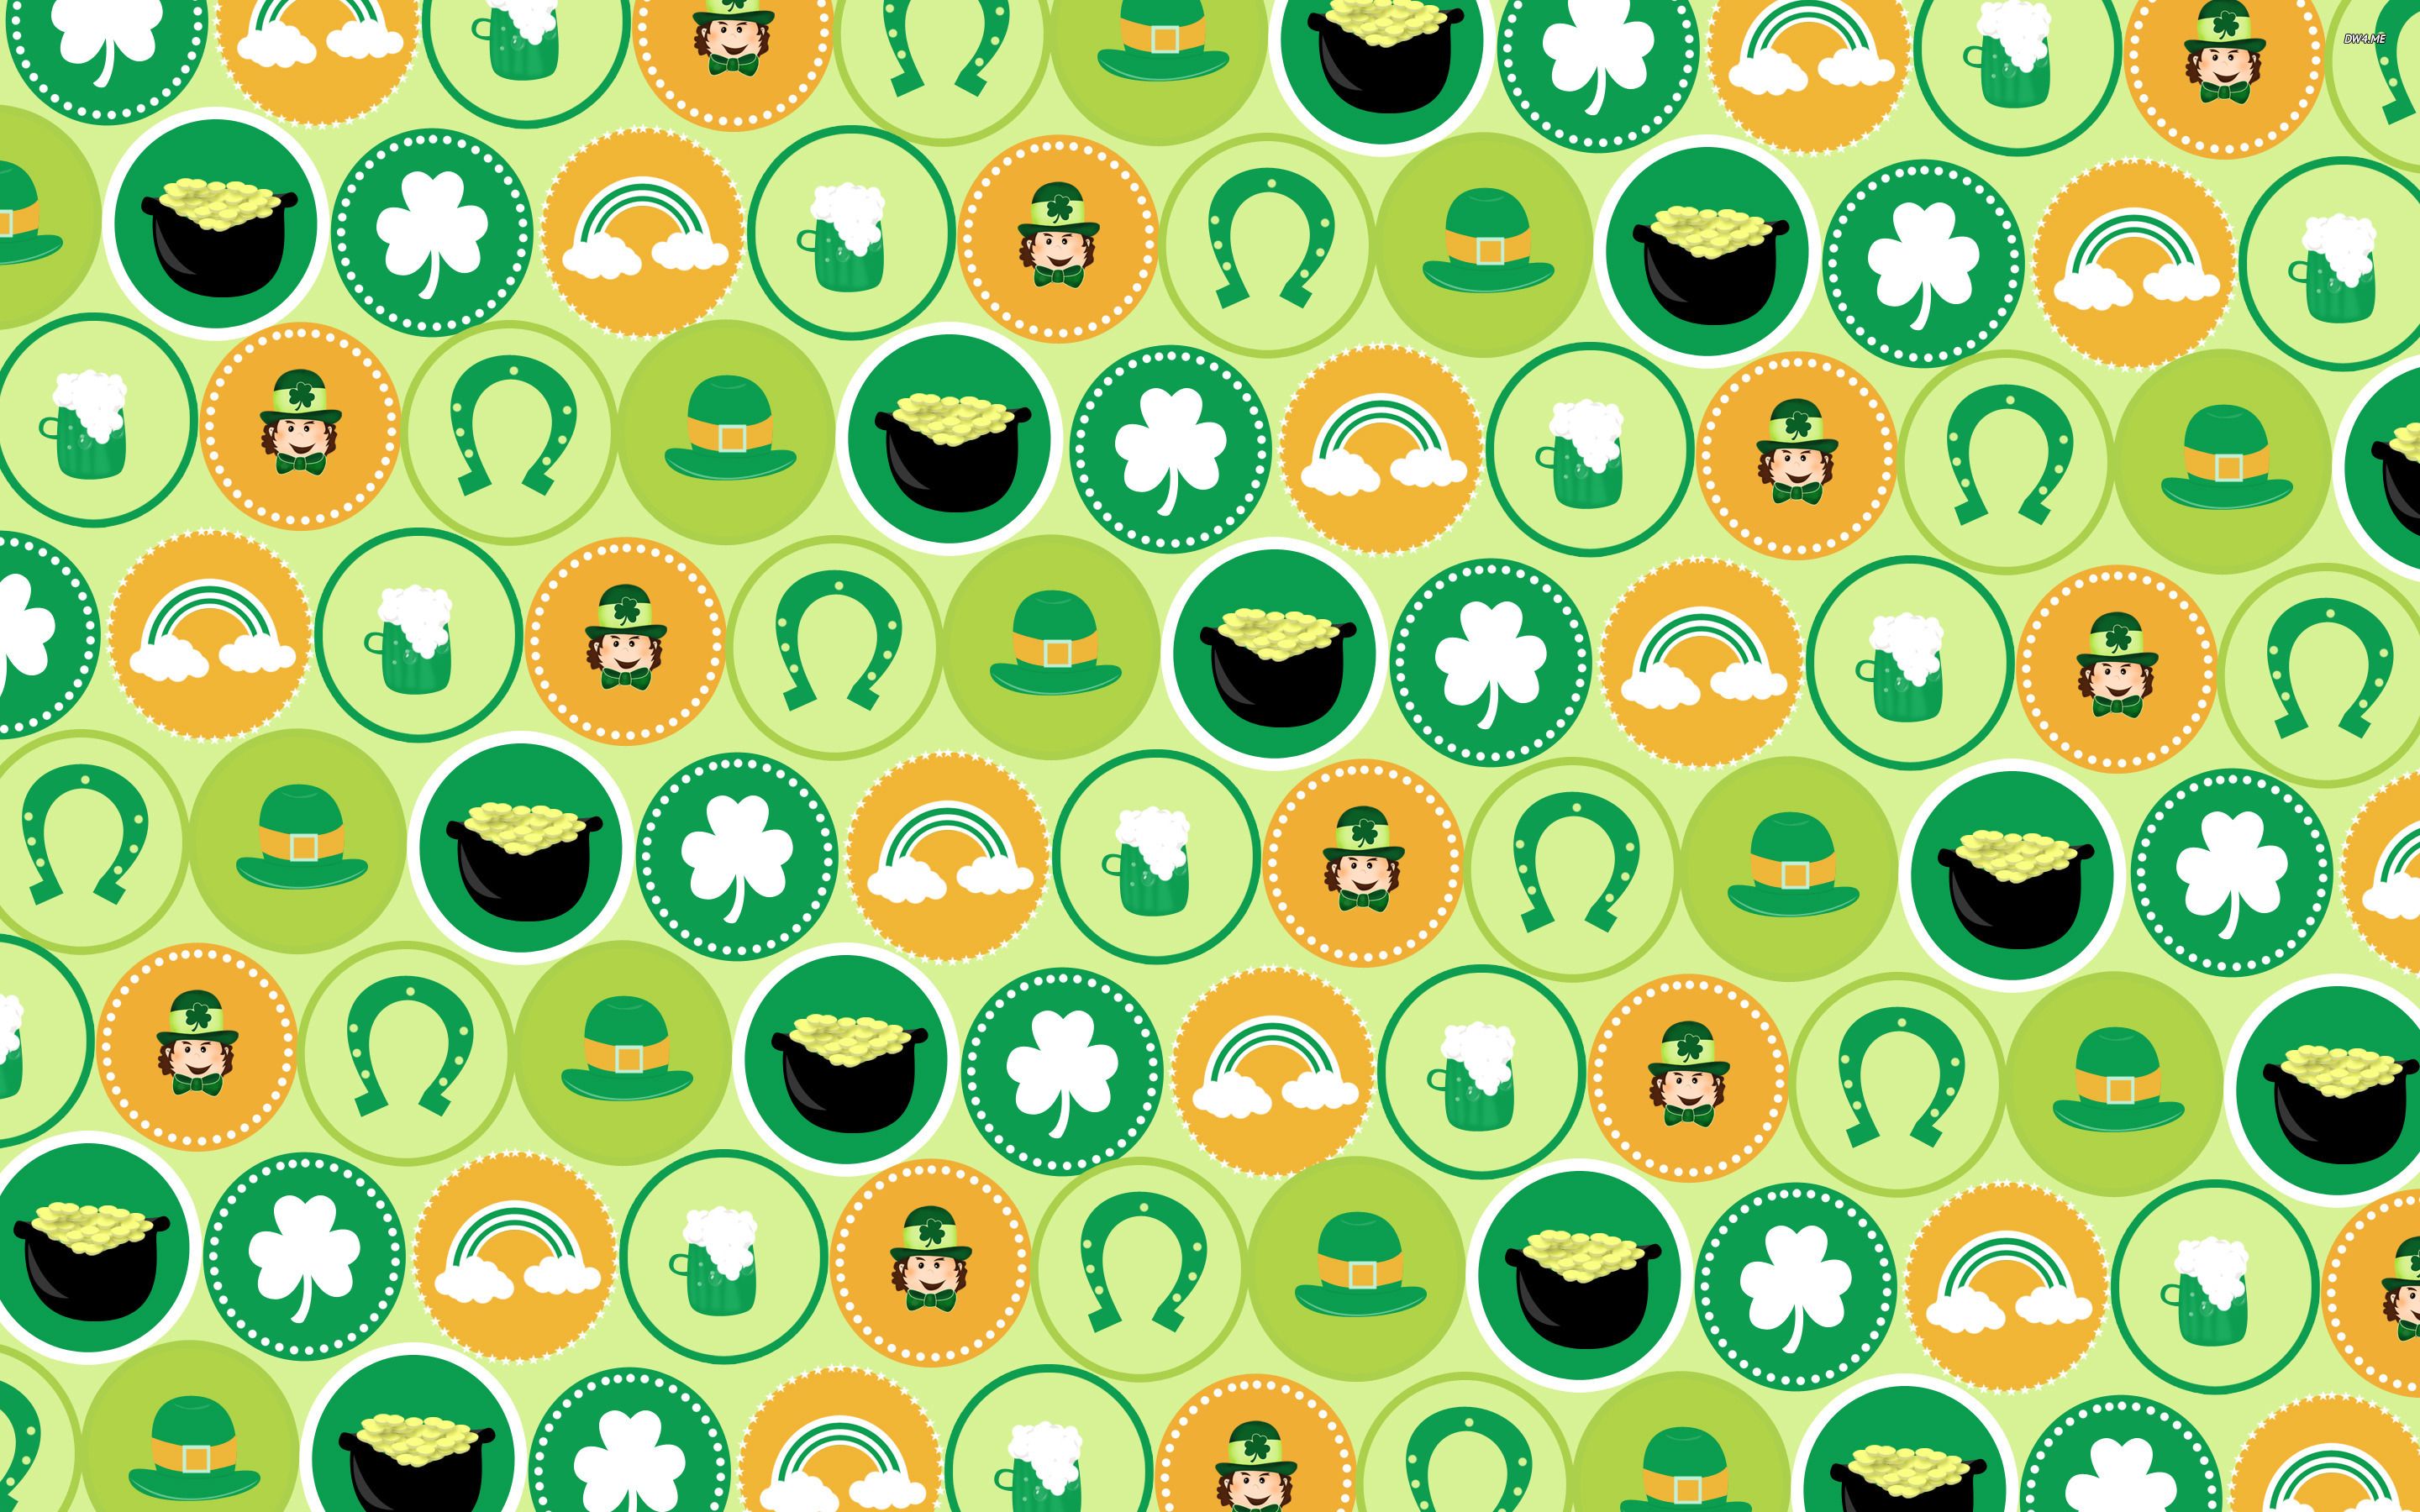 St Patricks Day Wallpapers For DesktopWallpaper Safari  St patricks day  wallpaper Powerpoint background free St patricks day